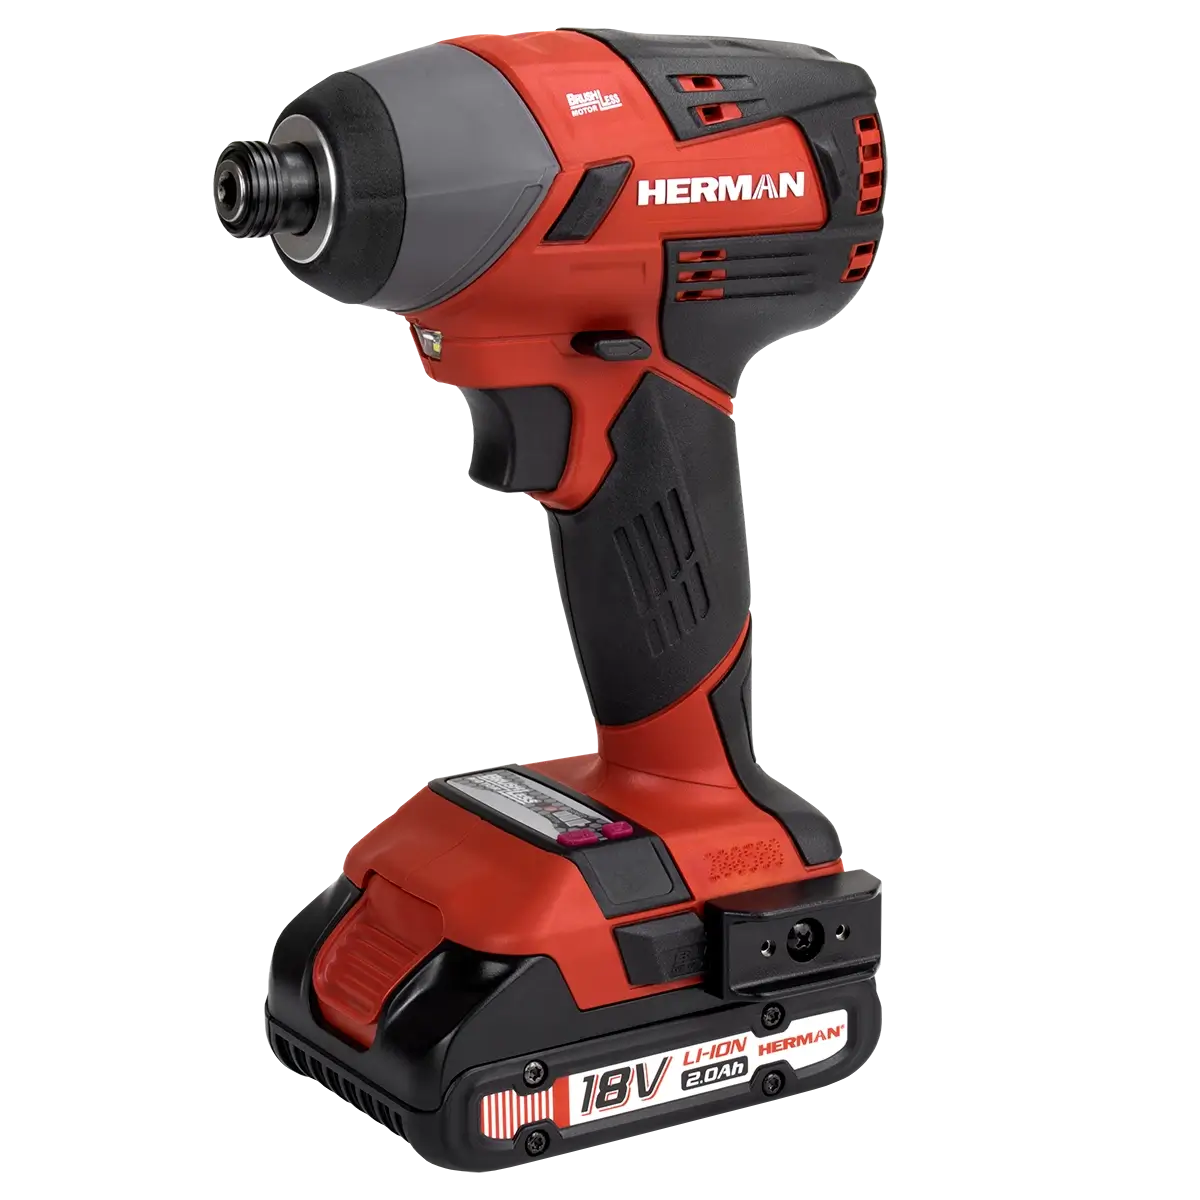 Cordless impact wrench HERMAN AXI 1800 18,0 V | 2Ah | Complete 143180002